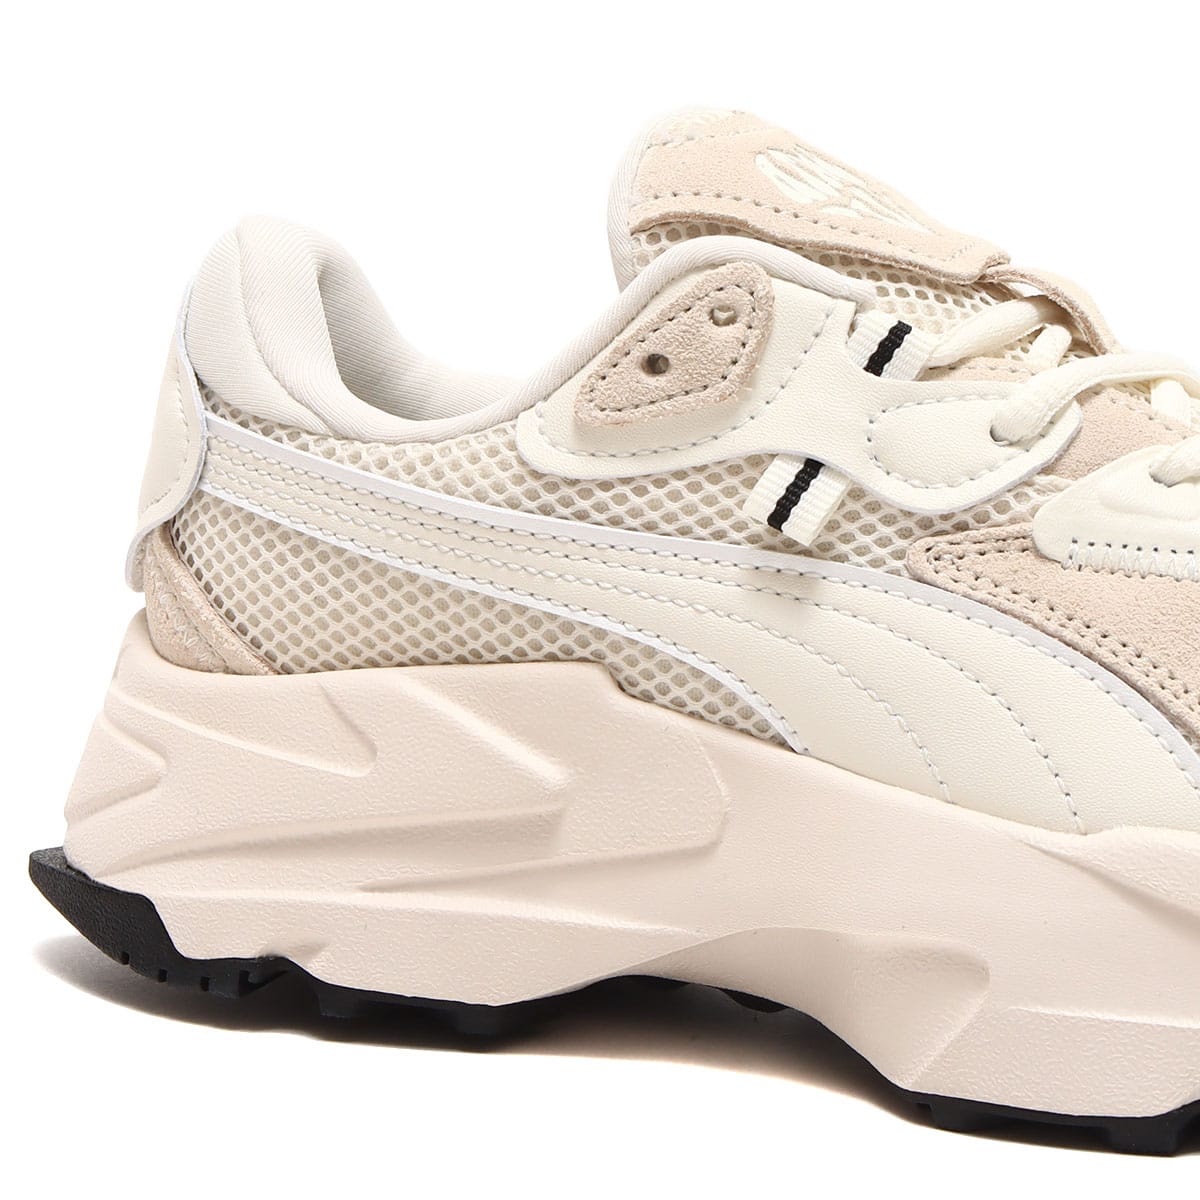 PUMA ORKID WNS ATMOS PINK FROSTED IVORY